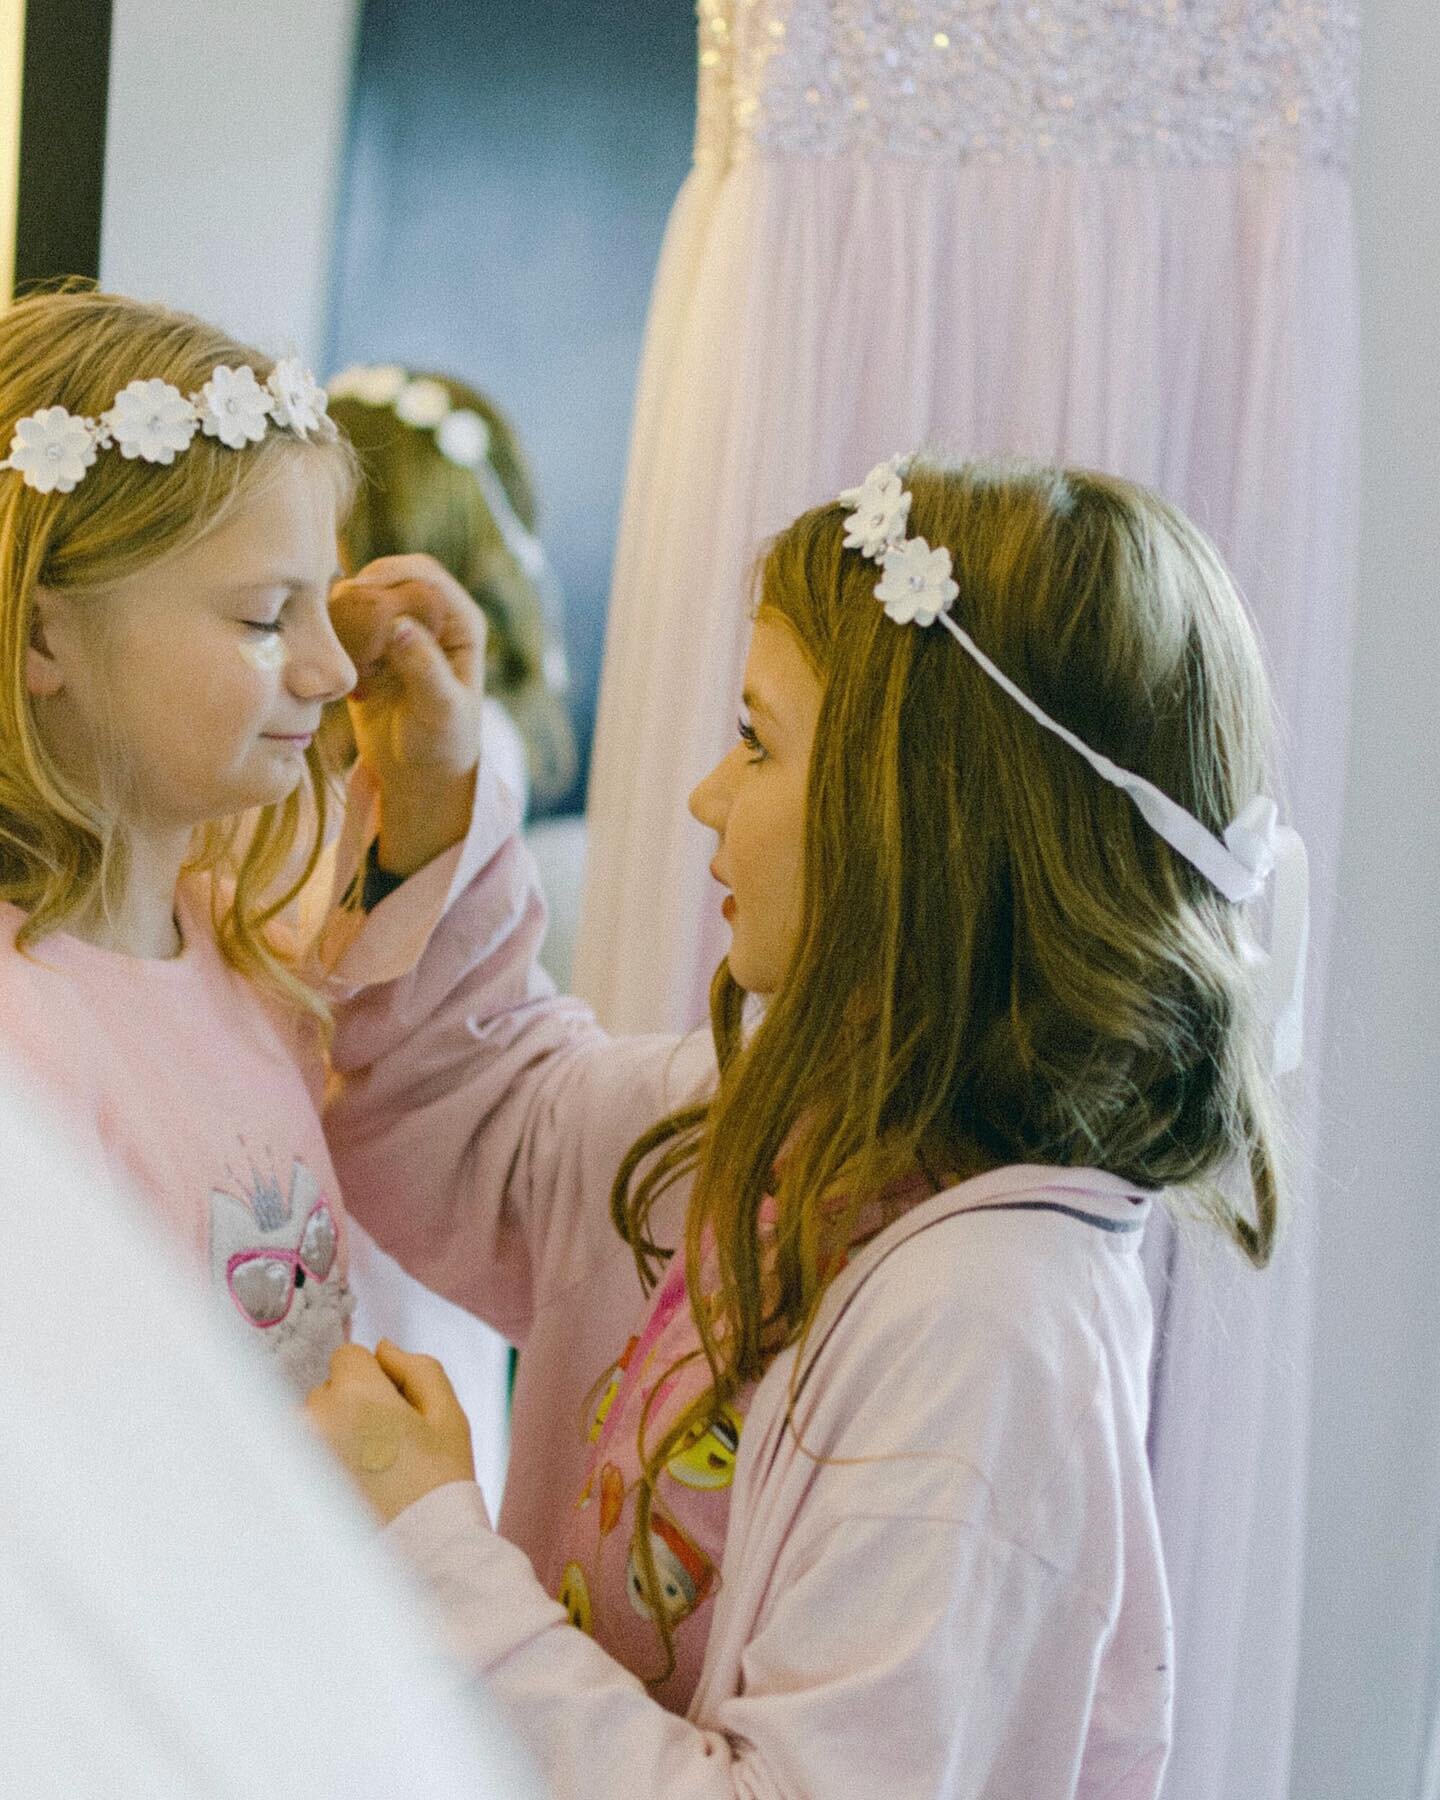 One of my favourite moments;  the adorable ring-bearer applies makeup to her friends face 🥰 #girlssupportinggirls #wedding #weddingguests #weddingday #weddingevent #ringbearer #cute #kidsfashion #kidsmakeup #adorable #londonweddingphotographer #engl